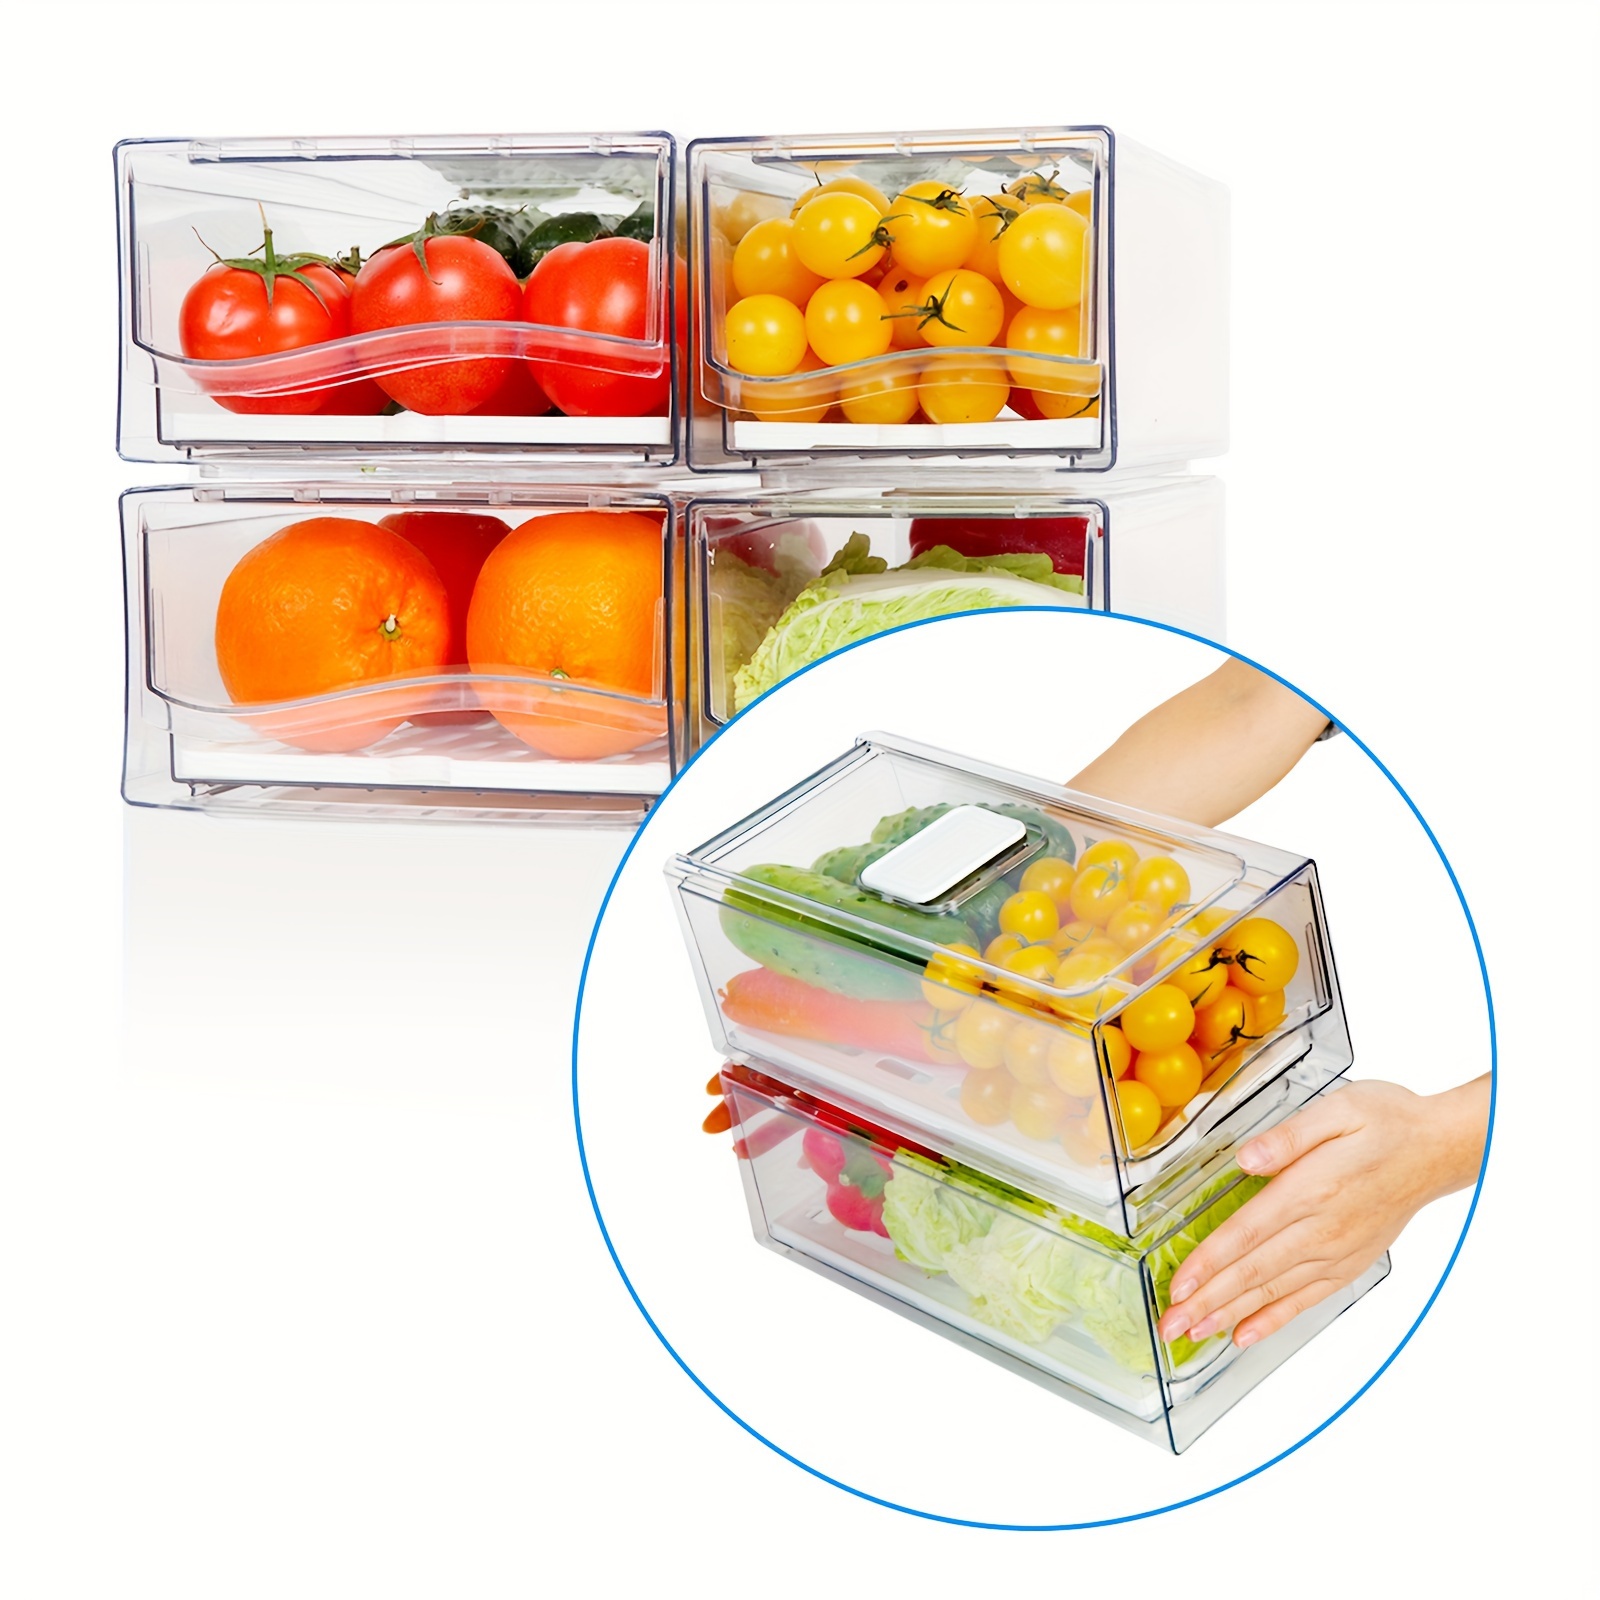 

2-pack Refrigerator Drawers, Pull Out Stackable Refrigerator Organizer, Clear Cabinet Organizer For Kitchen, Pantry, Food Containers, Produce Storage